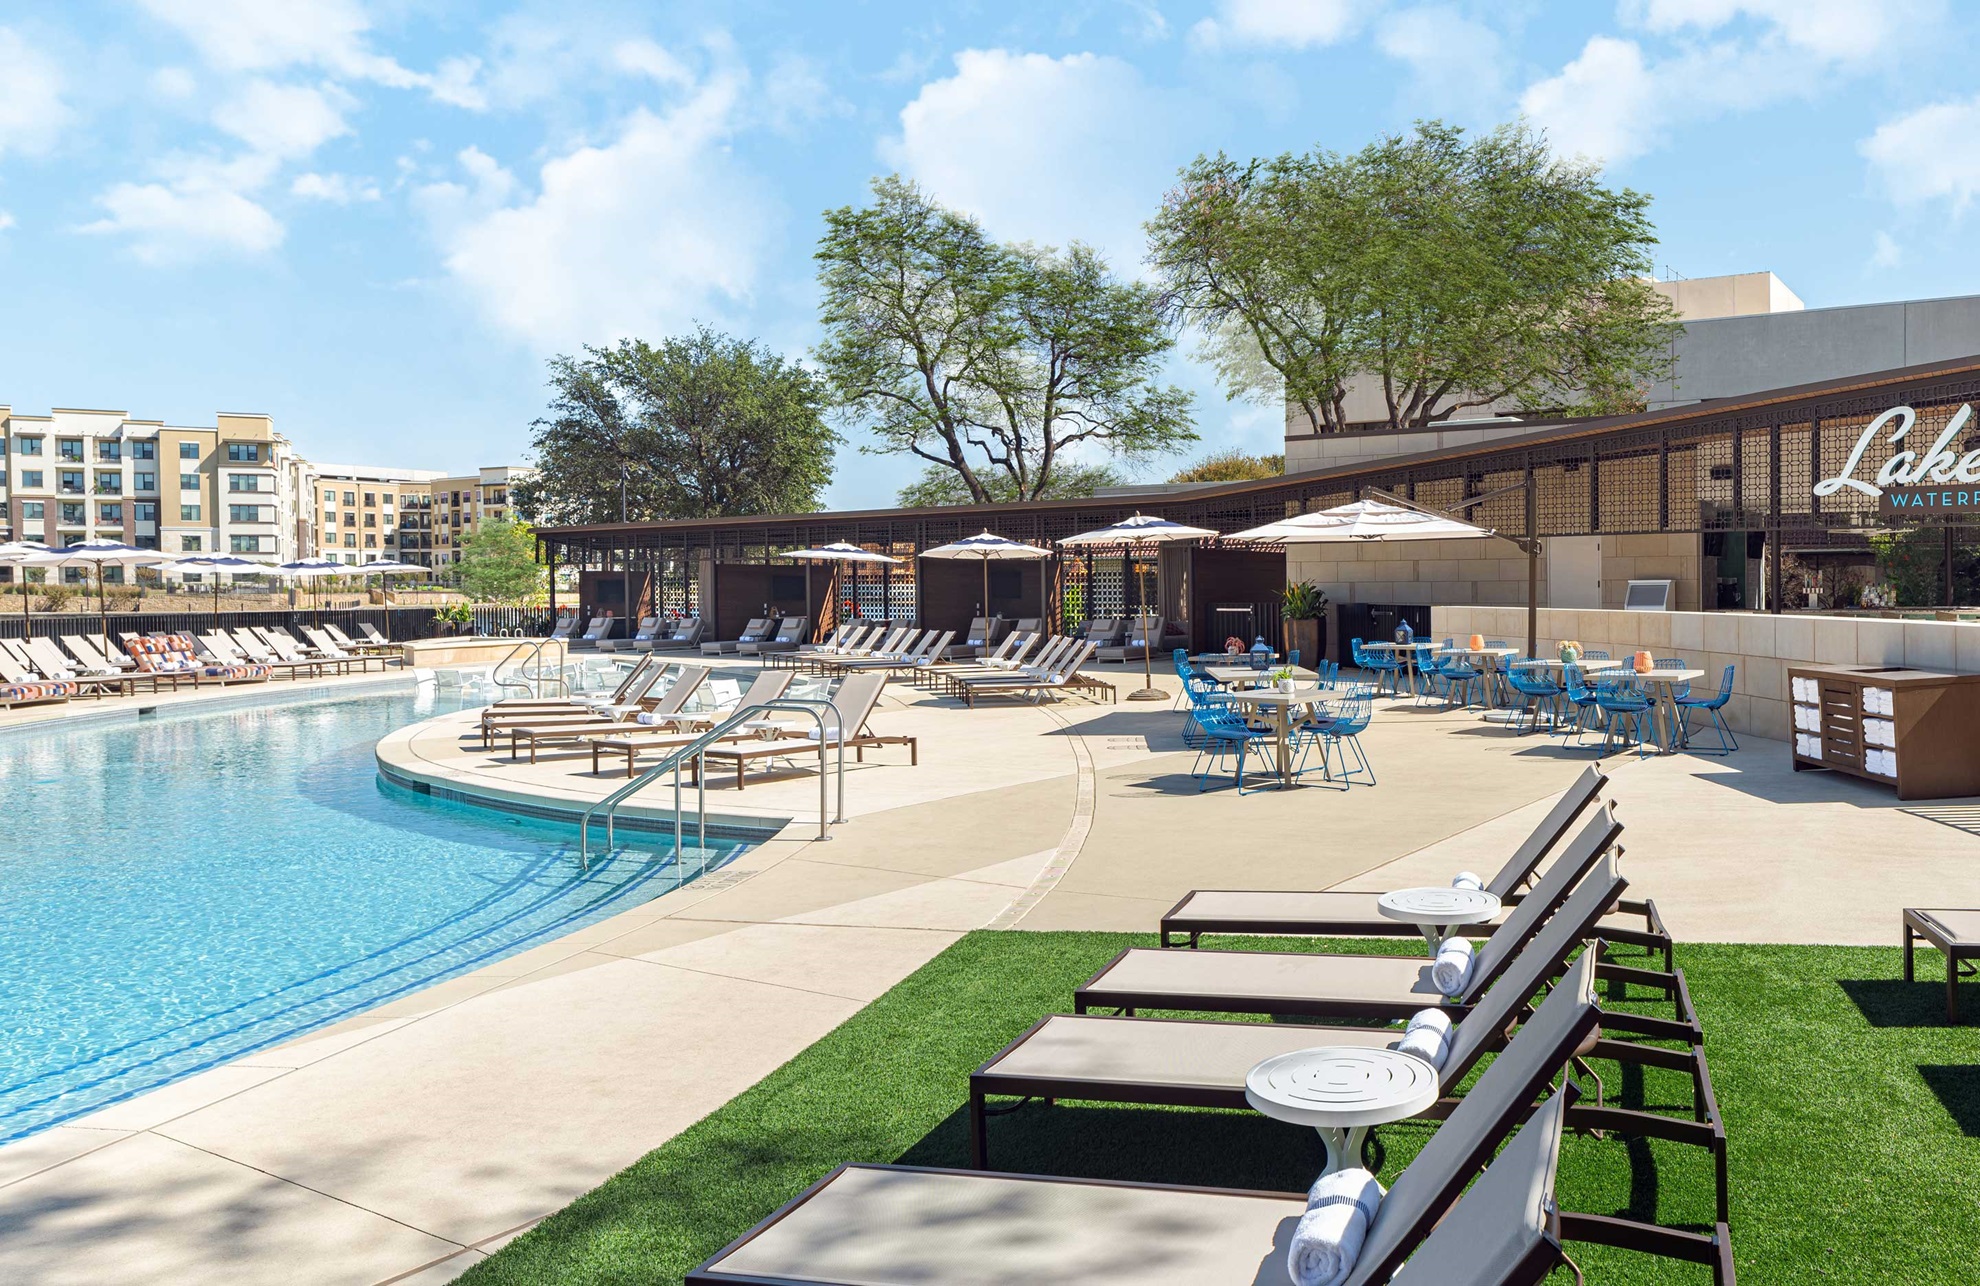 Omni Las Colinas pool area with lounge chairs. 